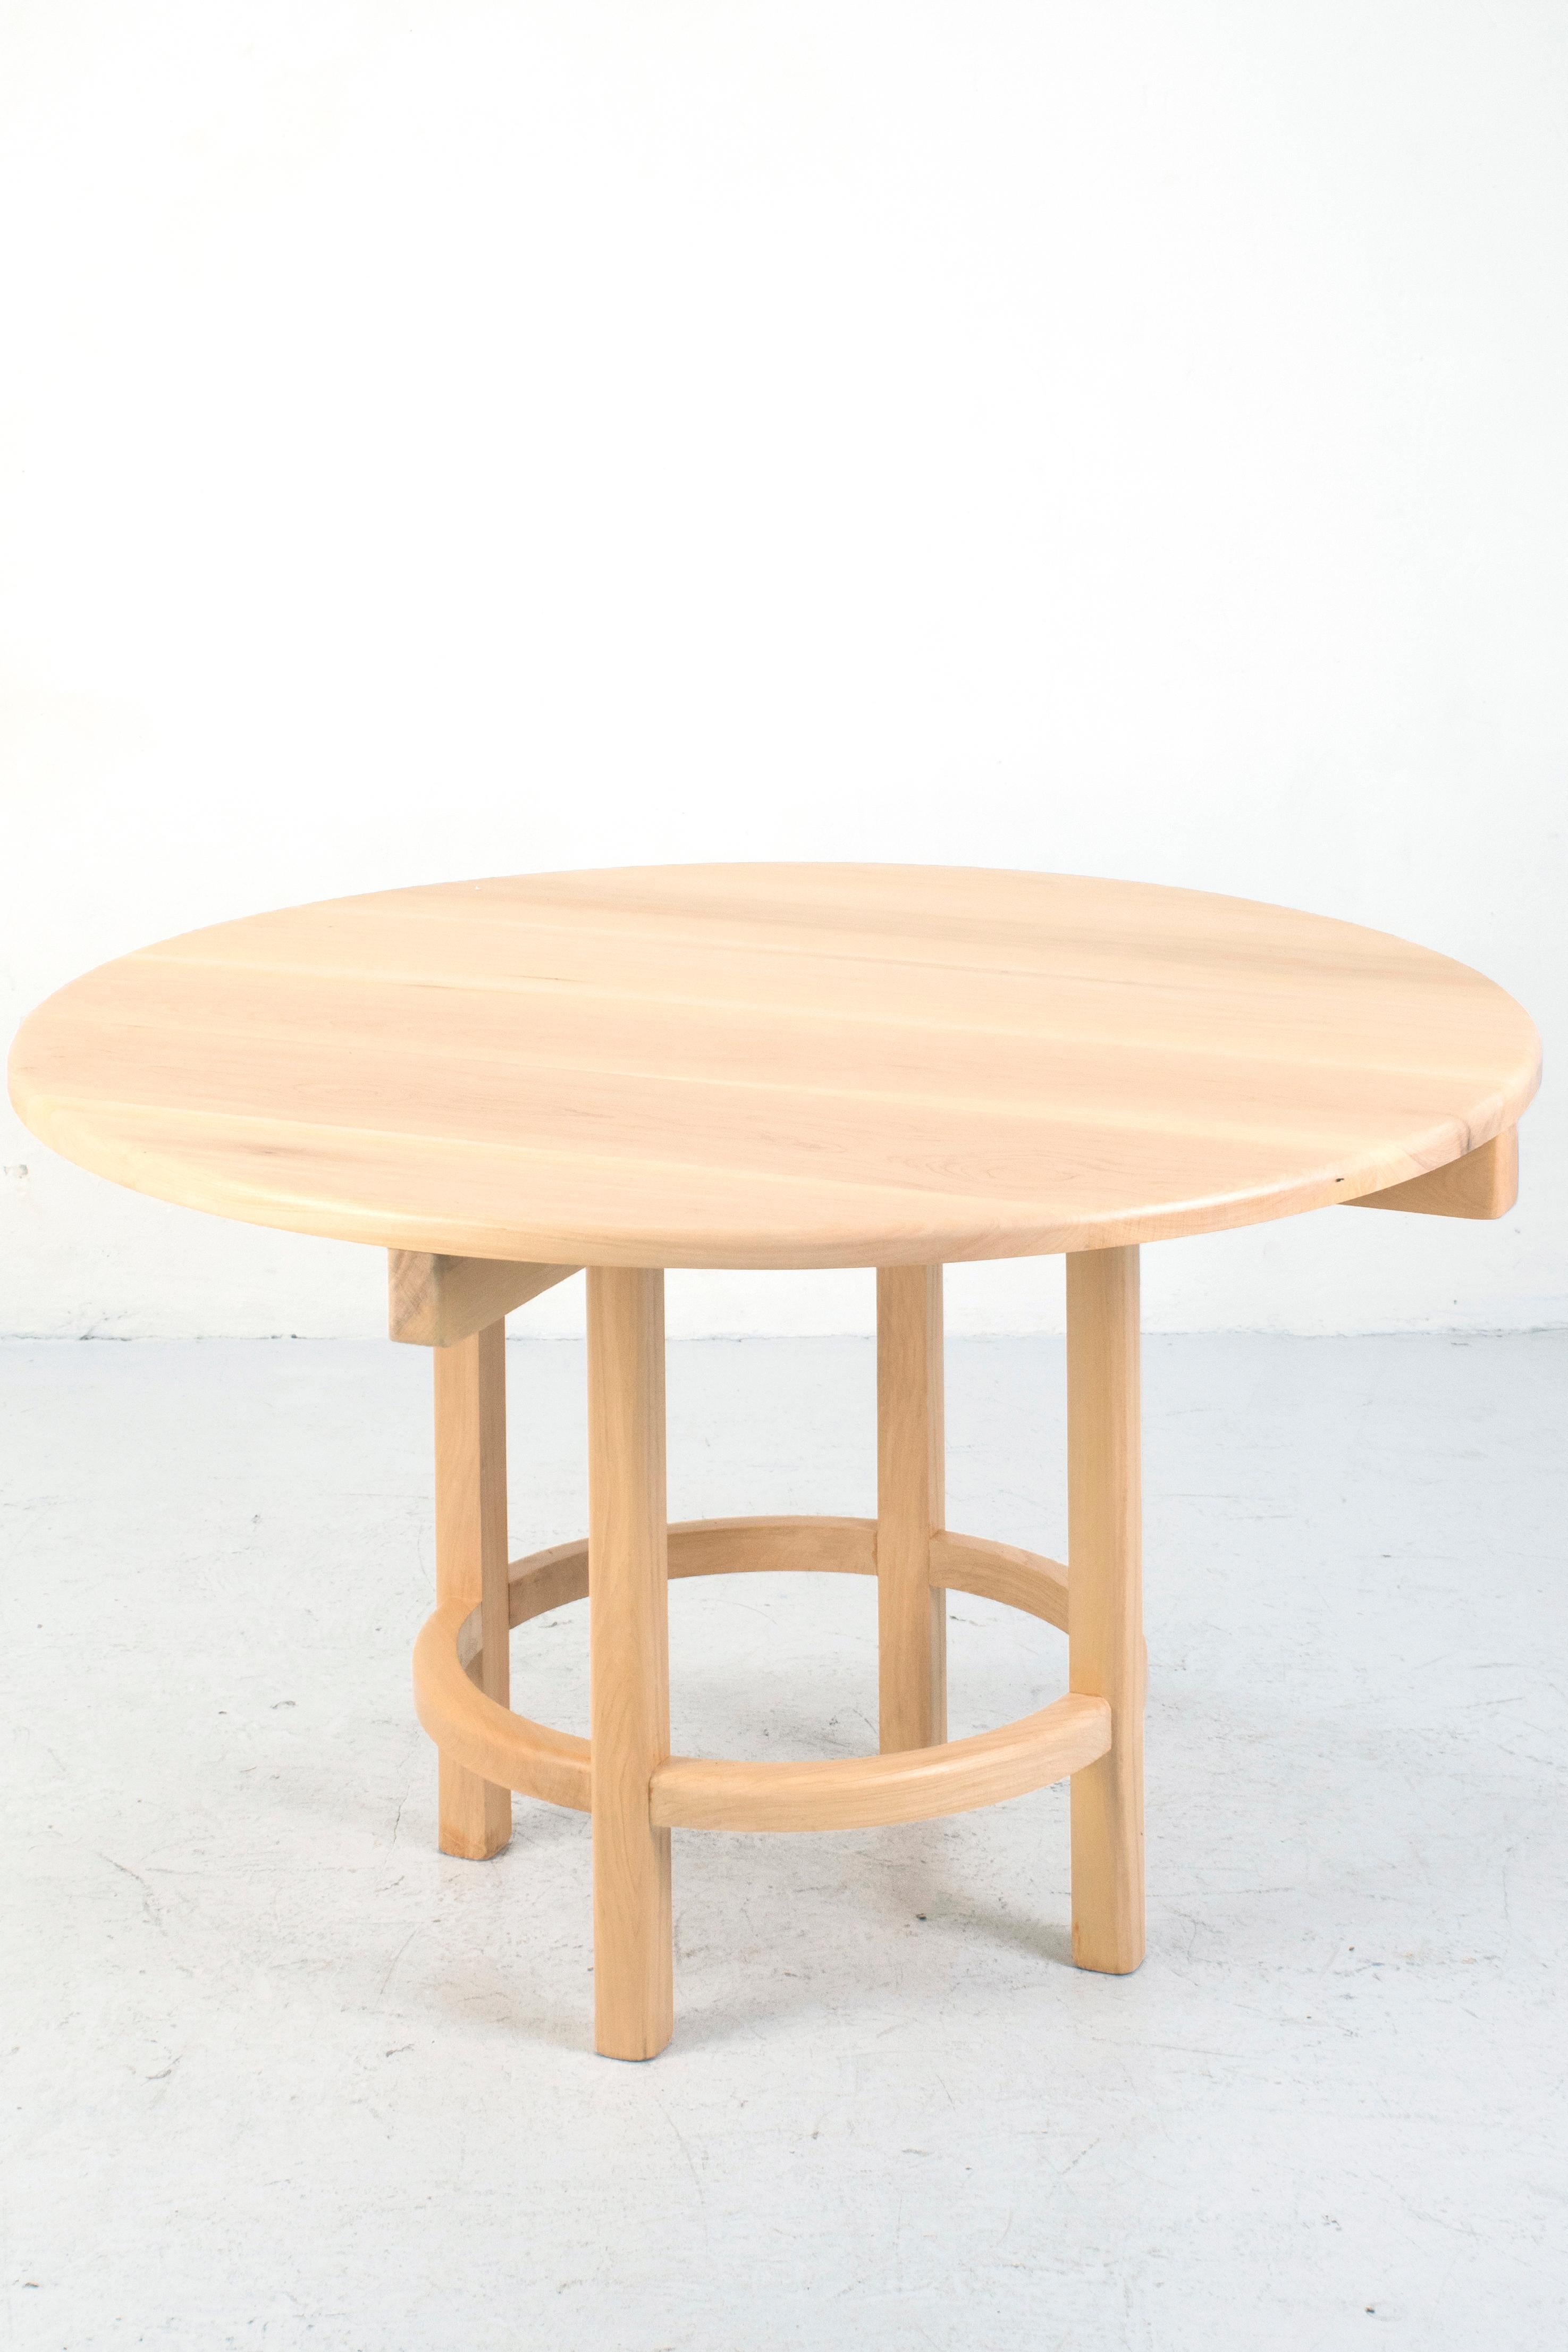 Lacquered Set of Orno Round Dining Table & 2 Chairs by Ries